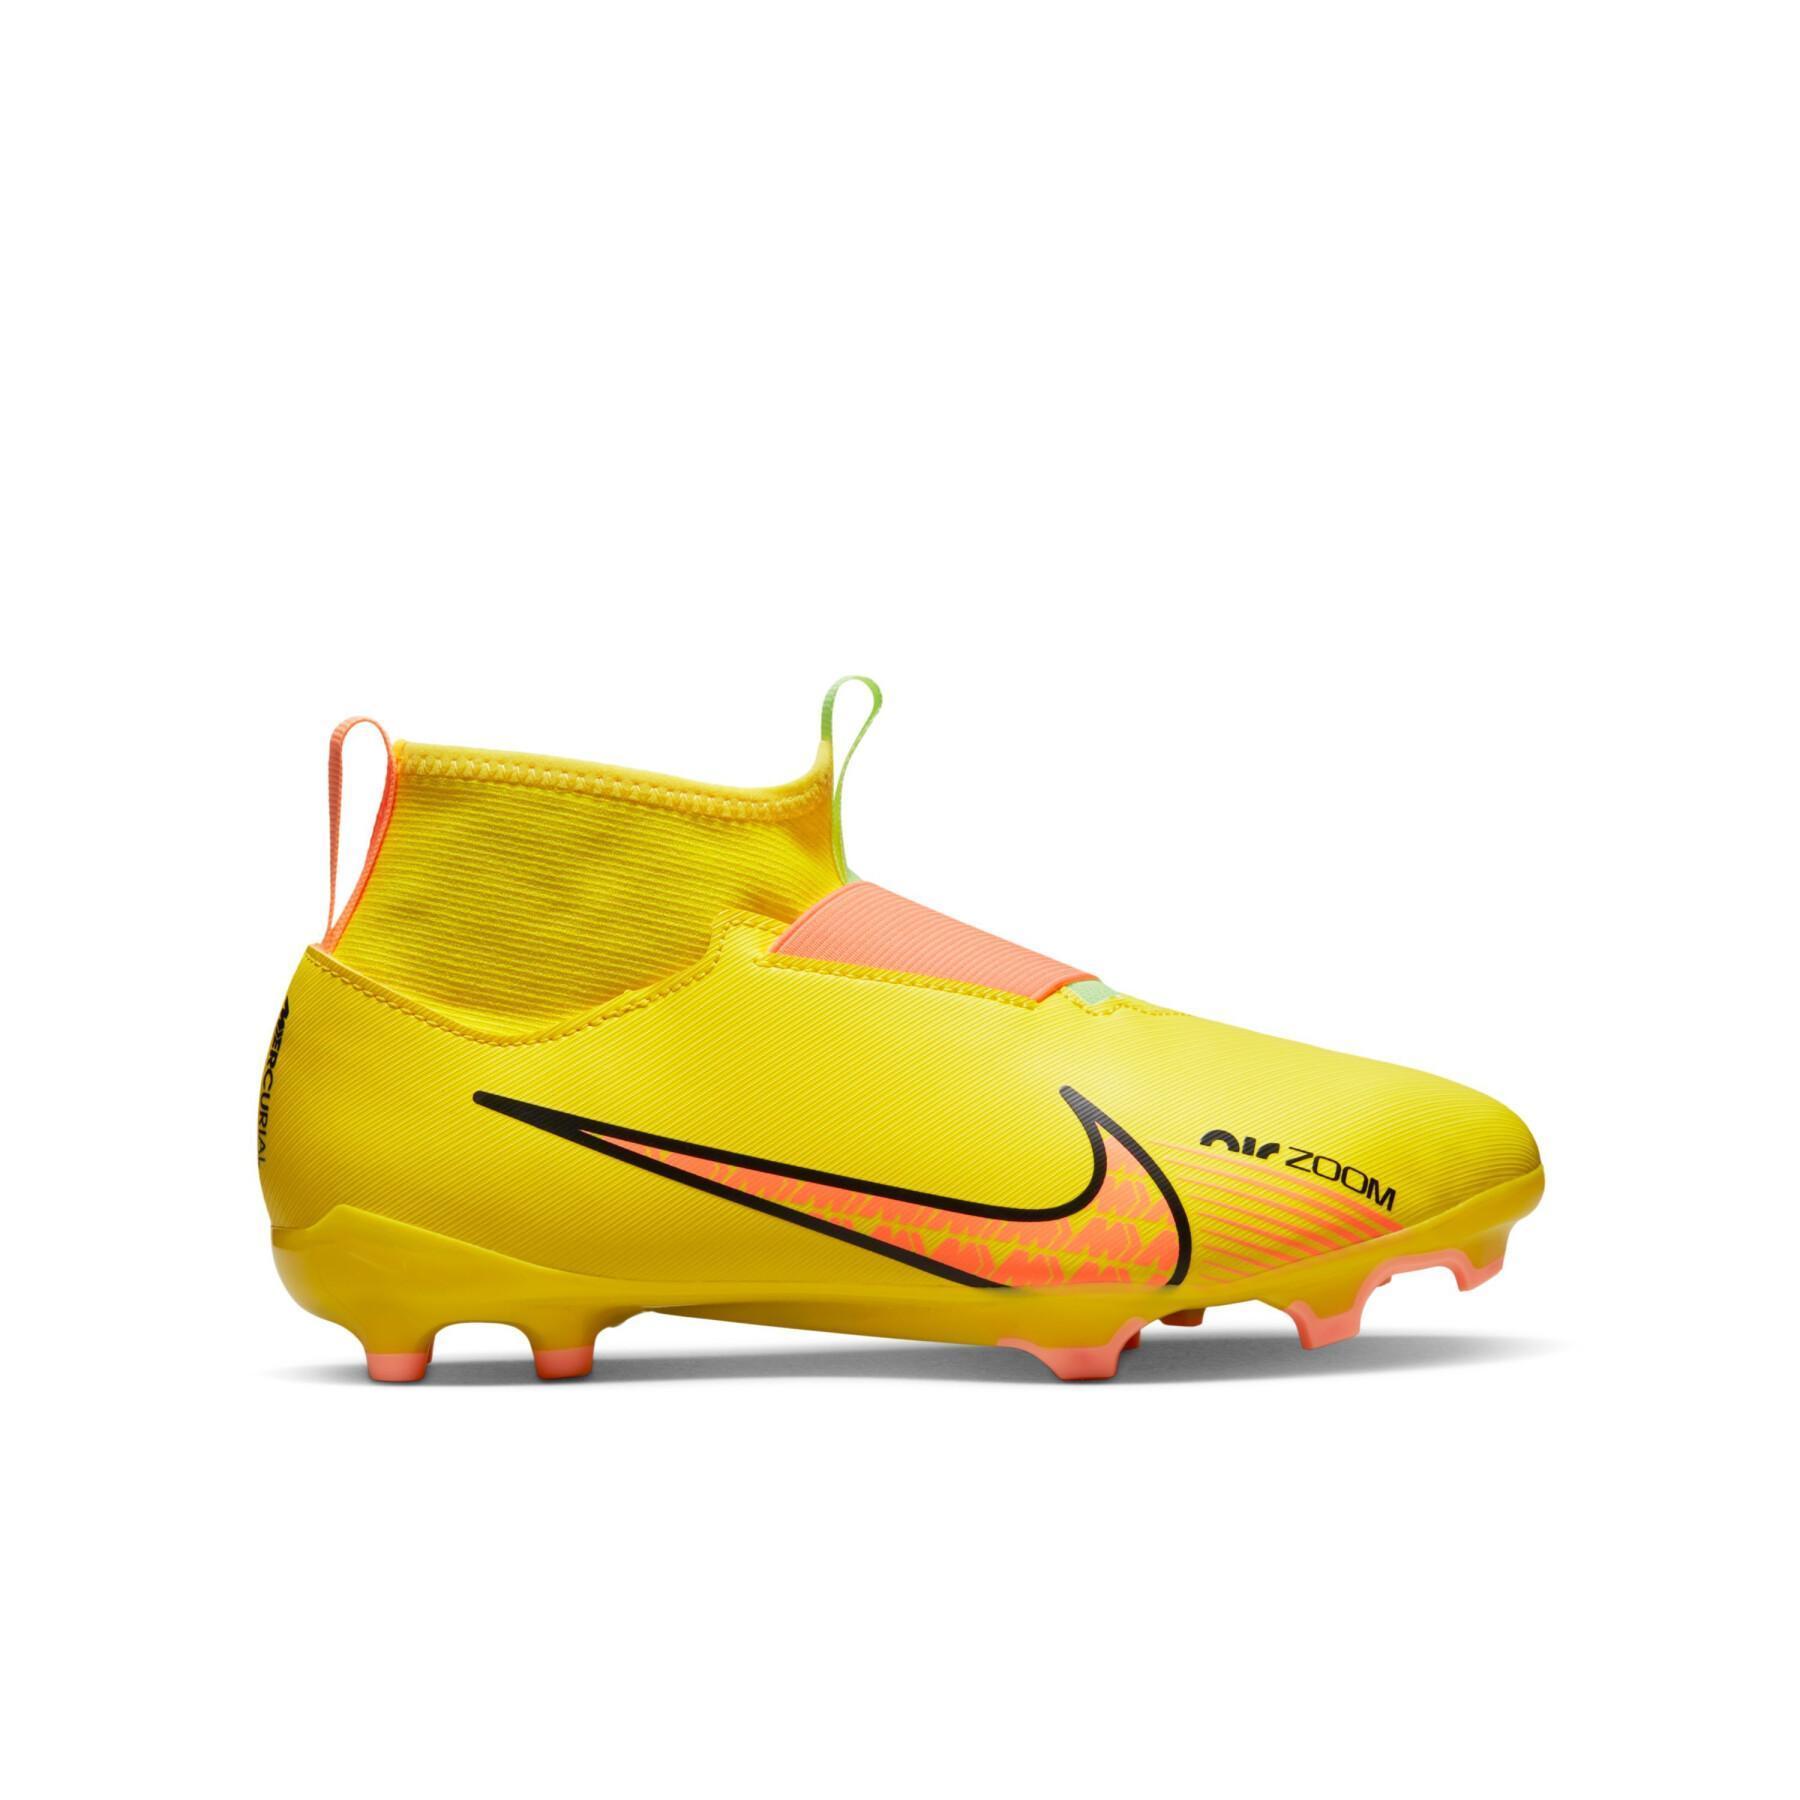 Boer Omgaan voorspelling Chaussures de football enfant Nike Zoom Mercurial Superfly 9 Academy FG/MG  - Lucent Pack - Nike - Chaussures - Football